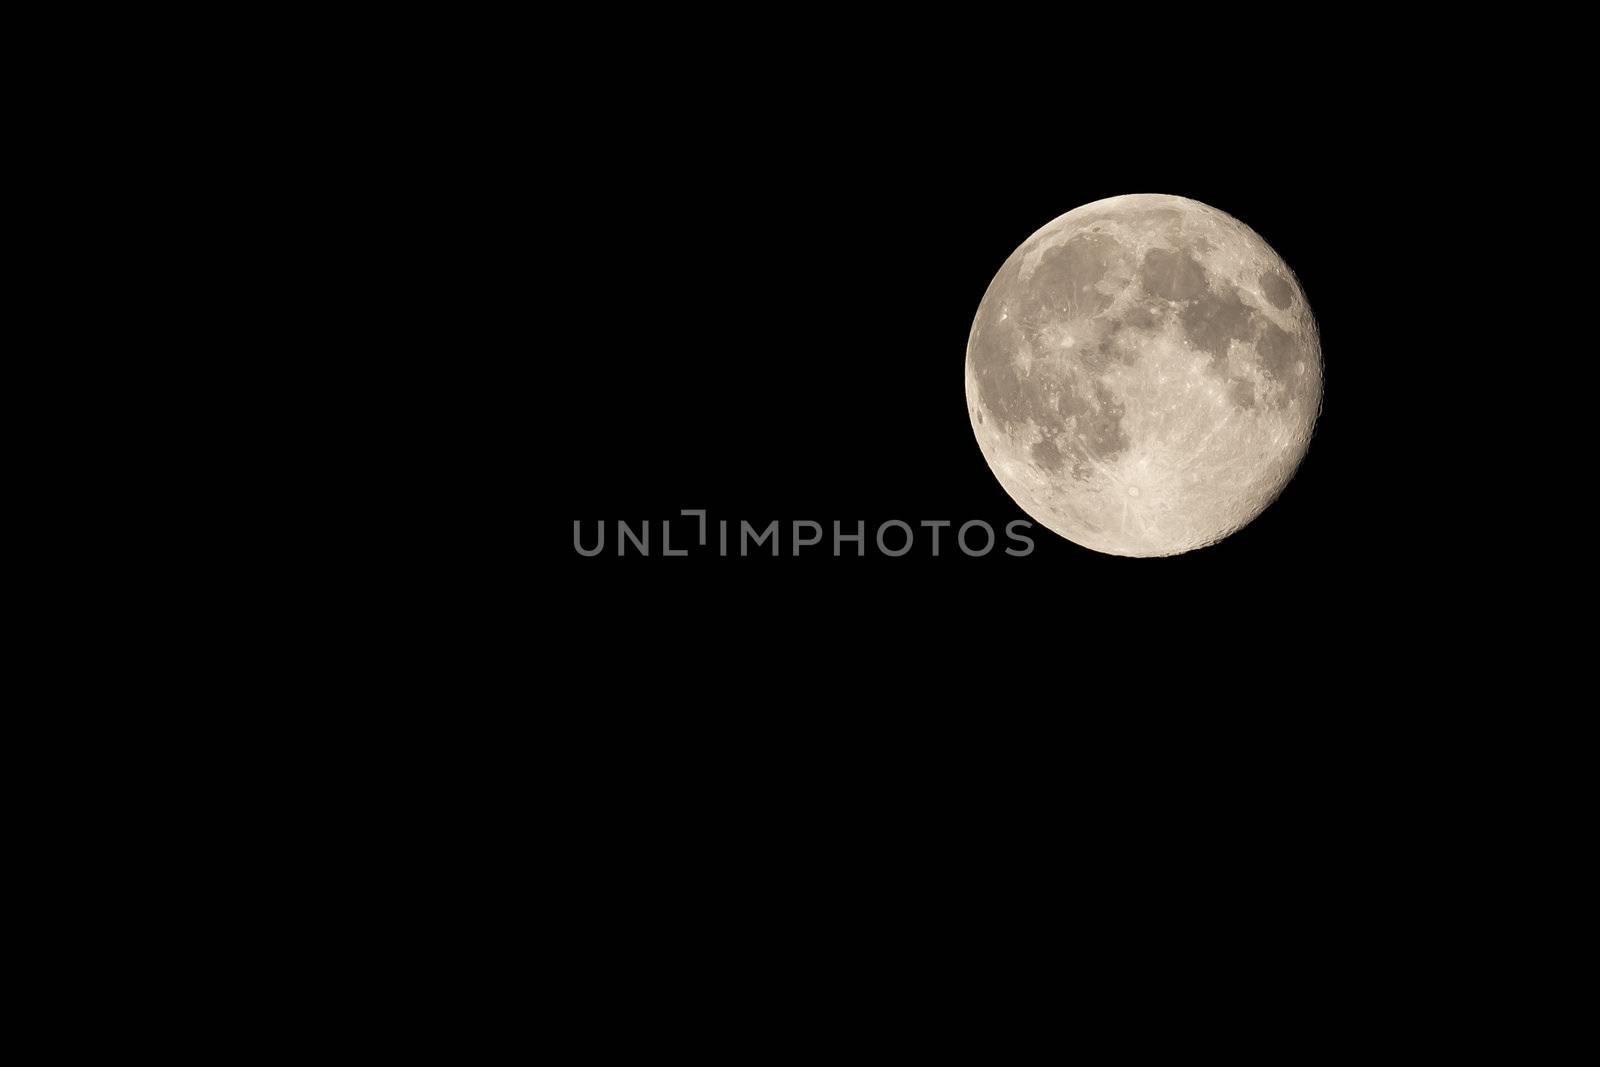 Full Moon on Night Sky Waning by One Day by scheriton